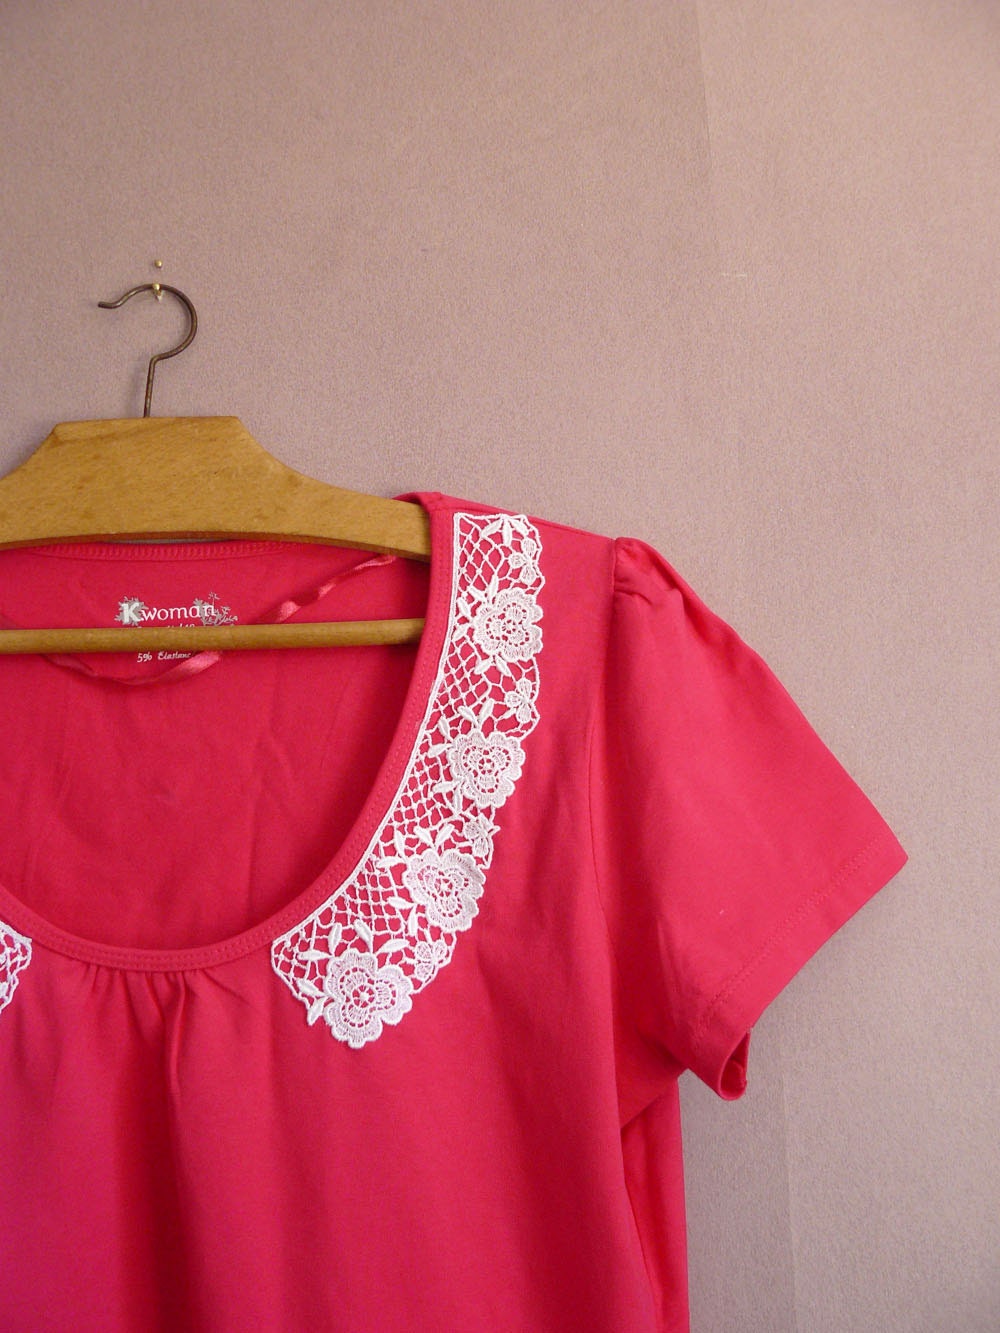 EMBRASSEZ MOI blouse in raspberry pink size S, M, L or XL